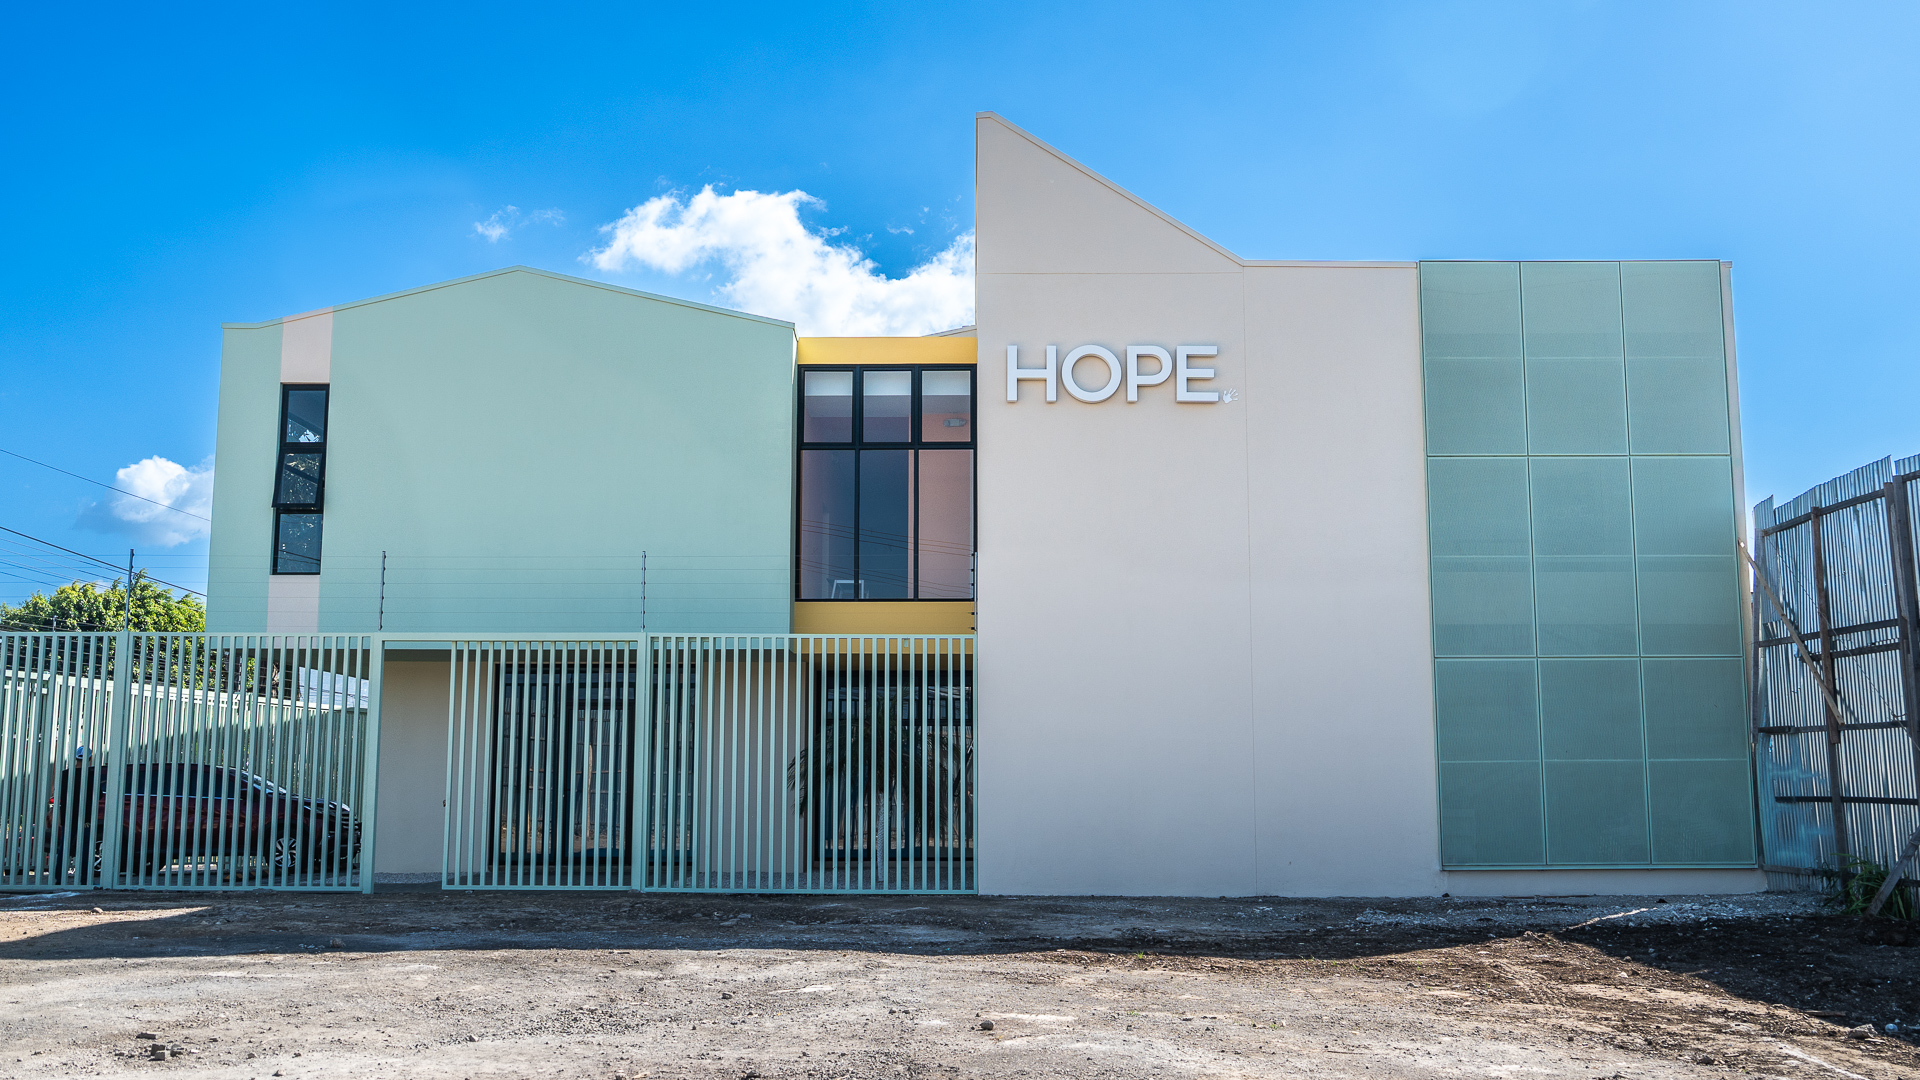 TACKLING CHILD POVERTY - The new Costa Rica Hope Center